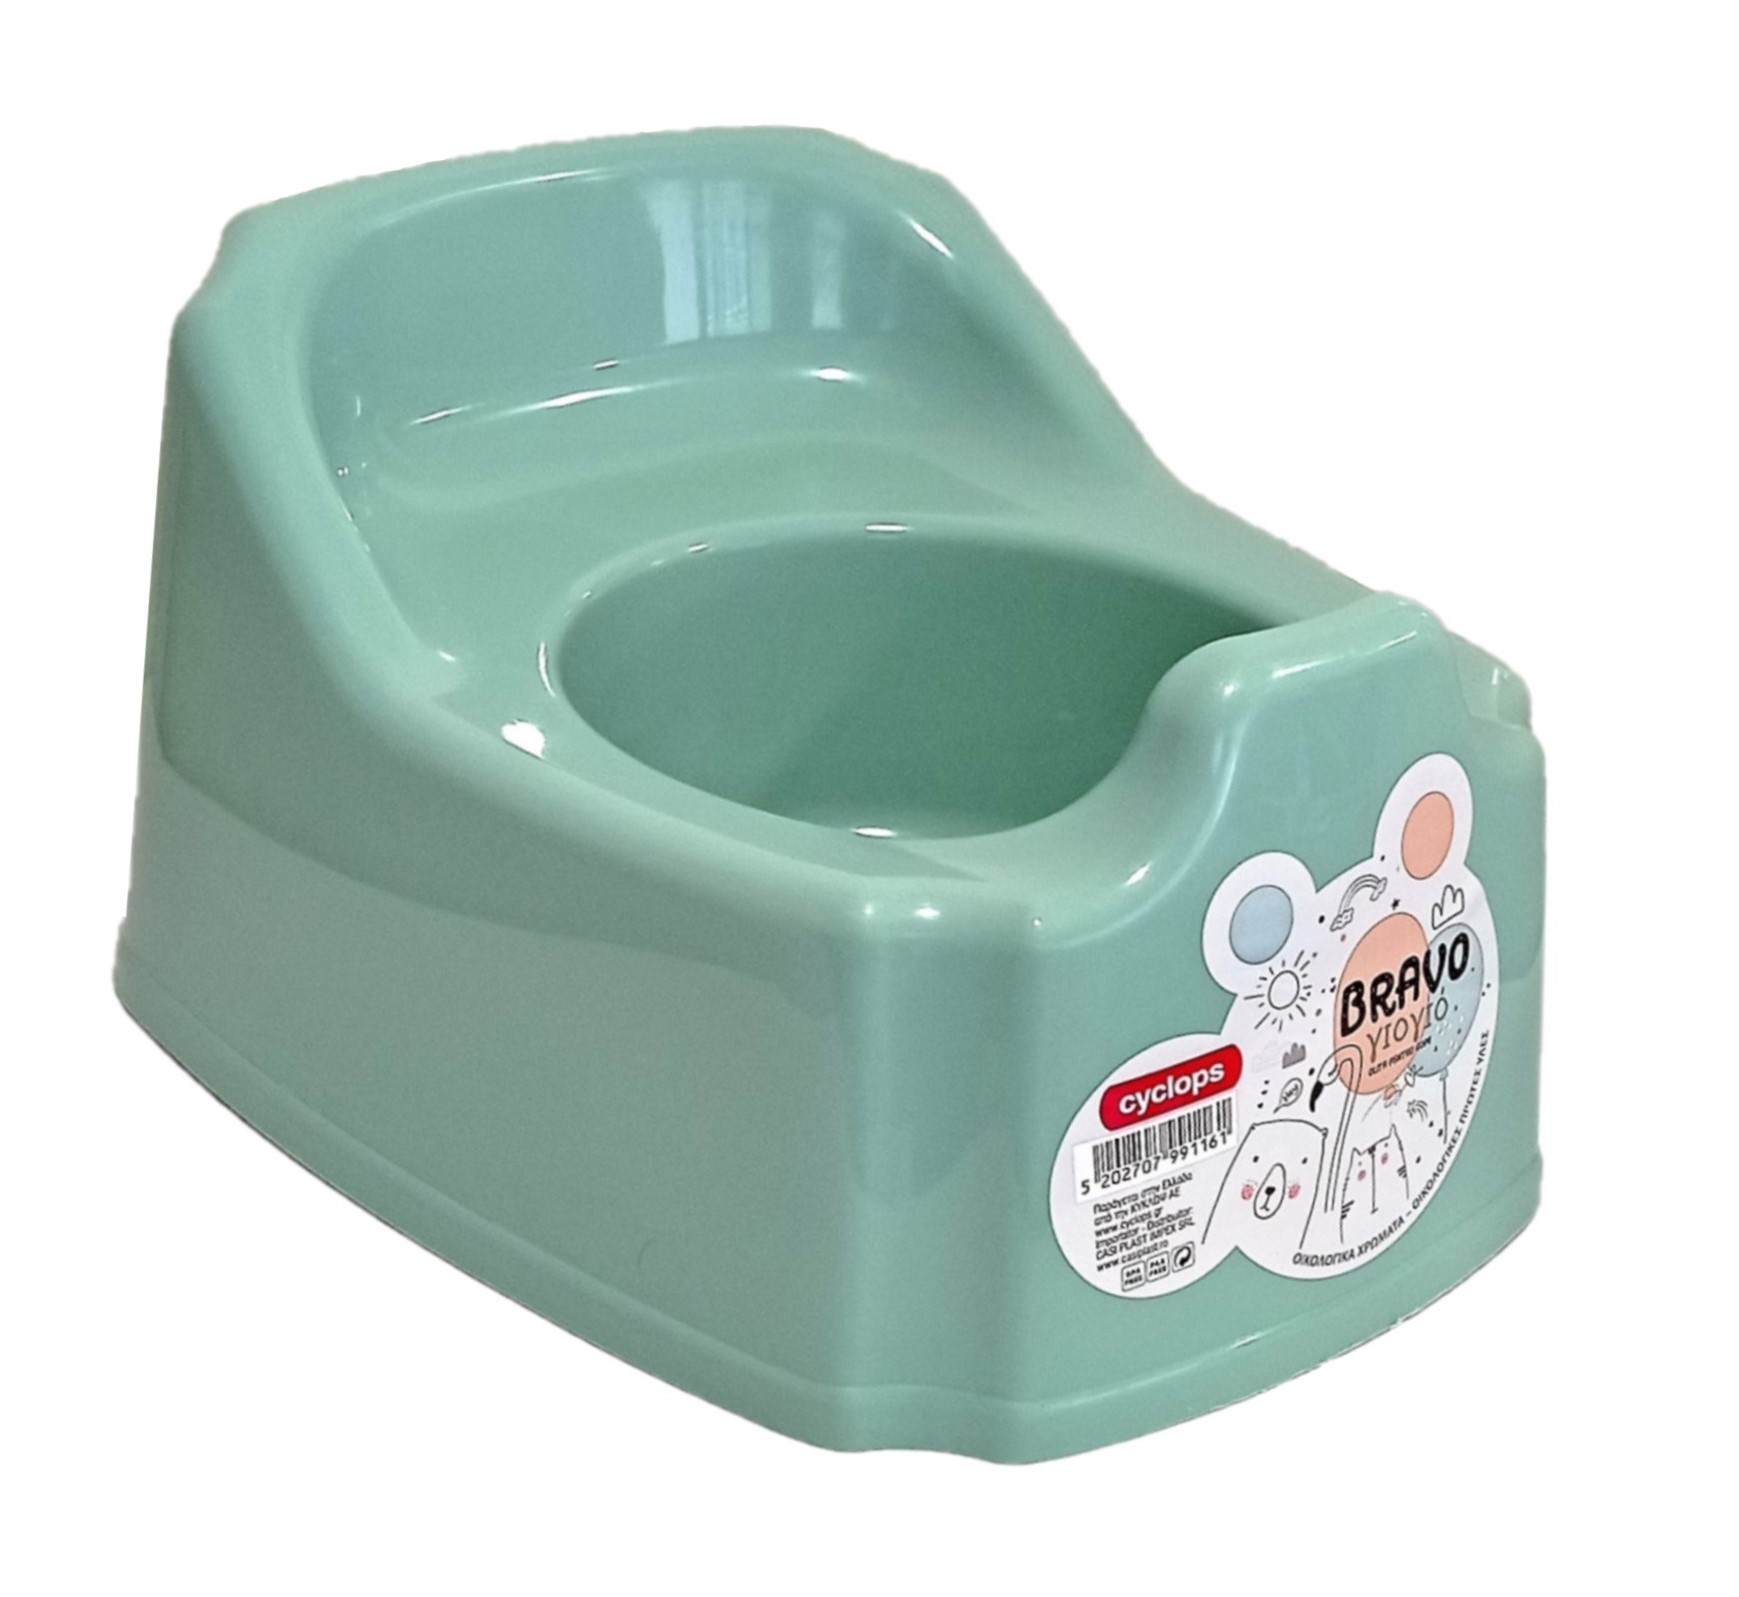 CYCLOPS SLOPE PAIL FOR BABY 2 ASSORTED COLORS